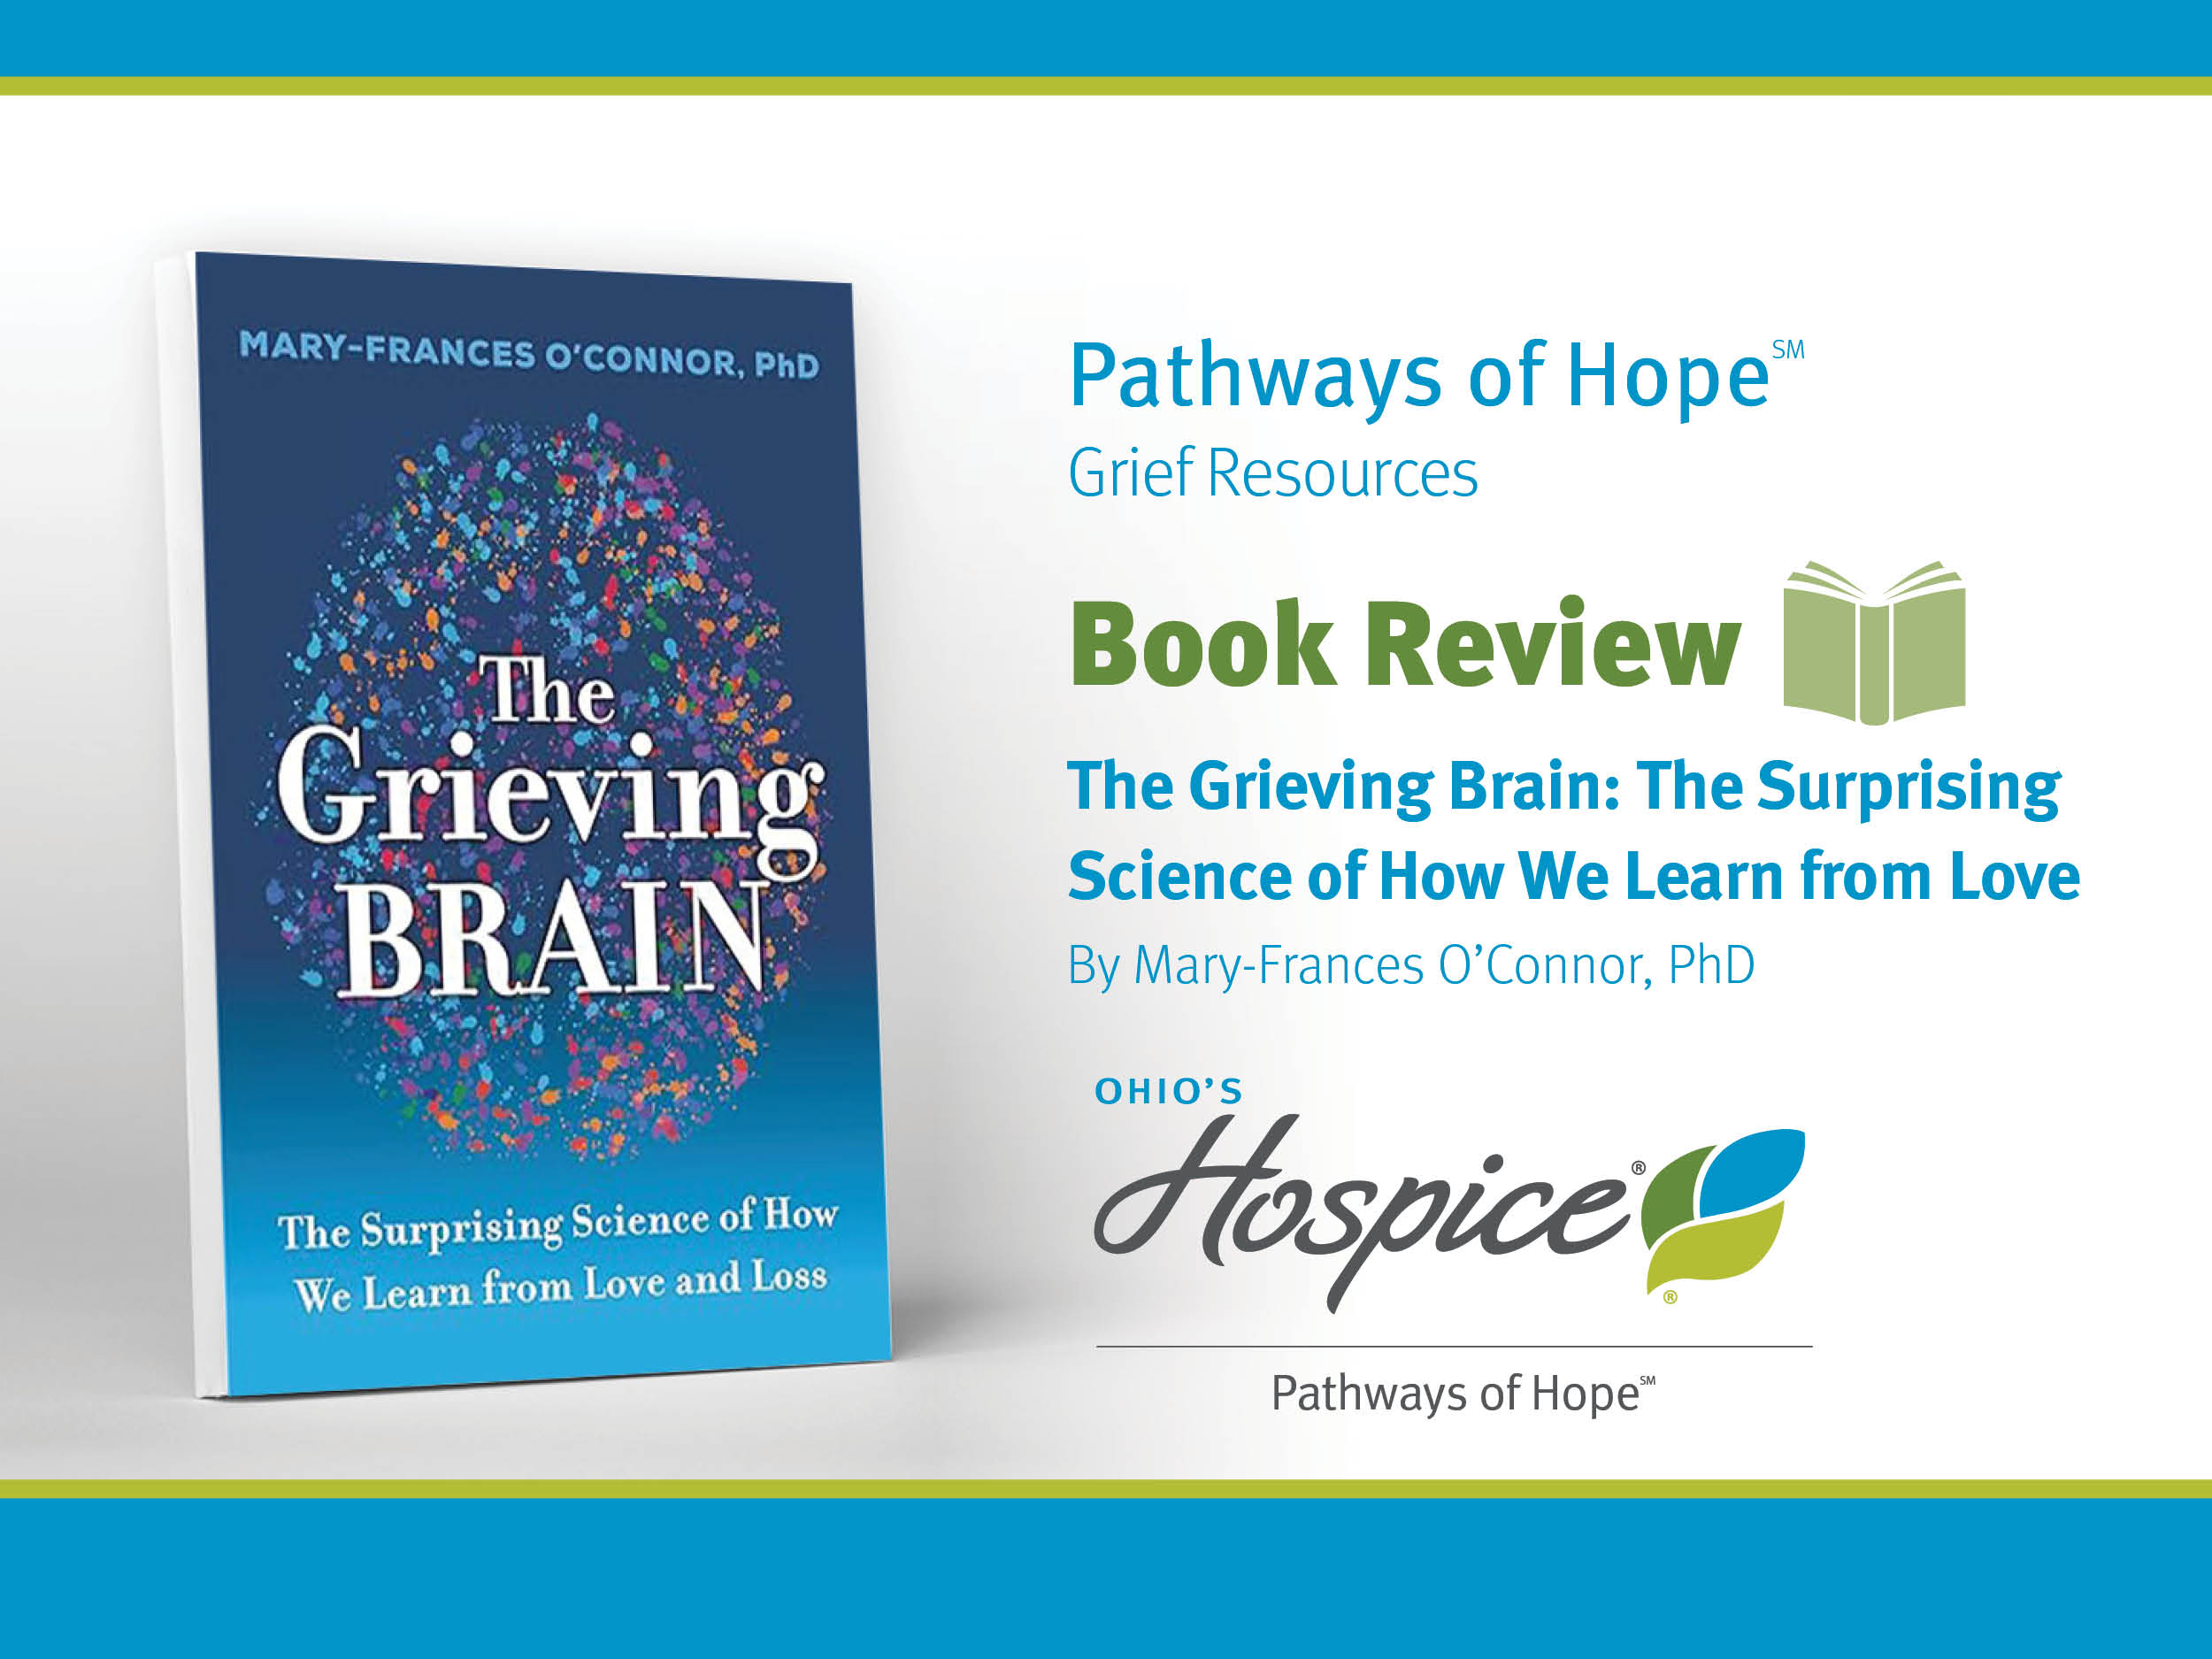 The Grieving Brain: The Surprising Science of How We Learn from Love and Loss by Mary-Frances O’Connor, PhD